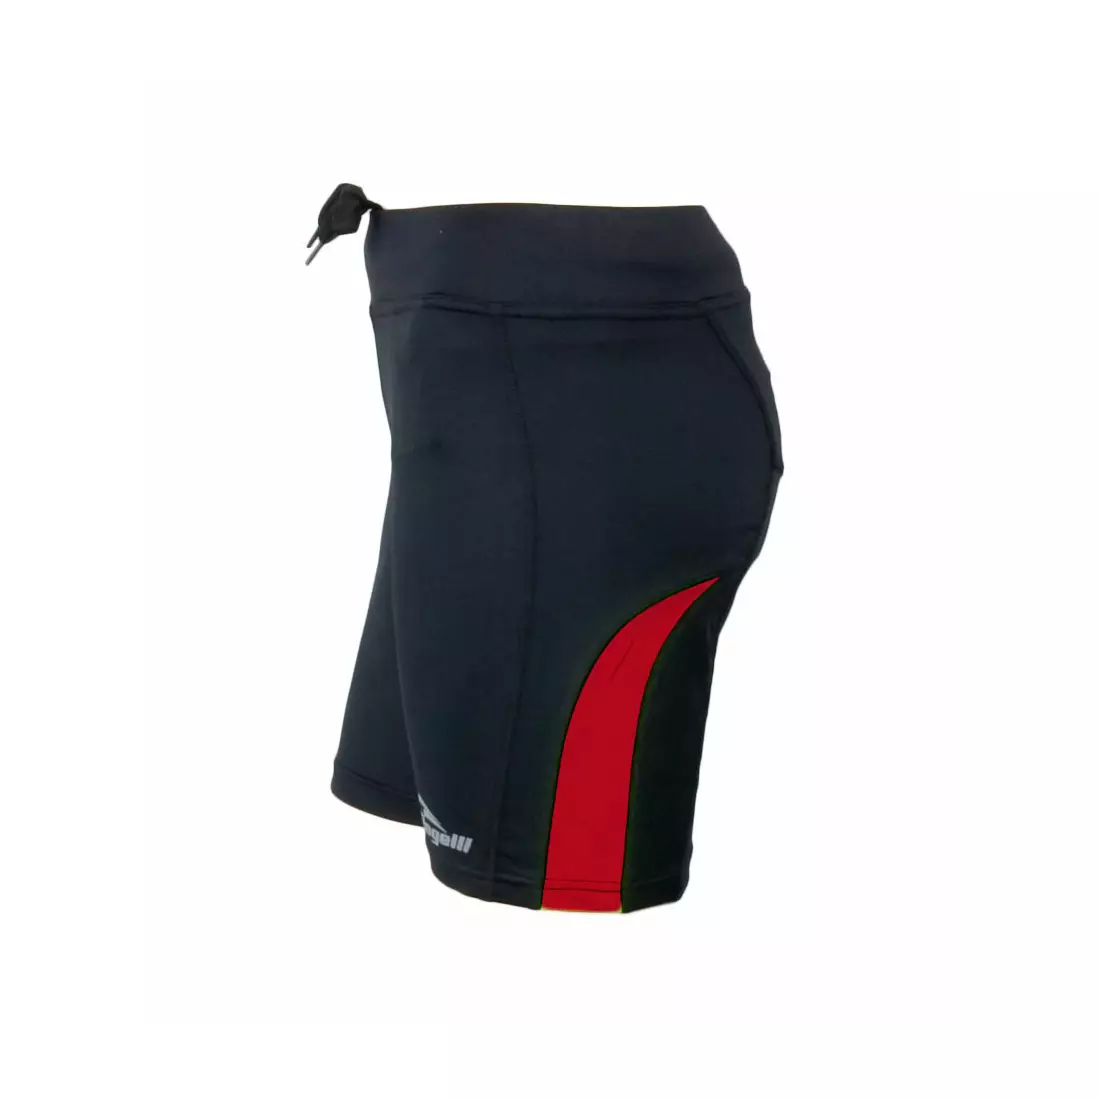 ROGELLI  RUN  EDIA - women's sports shorts, color: Black and red